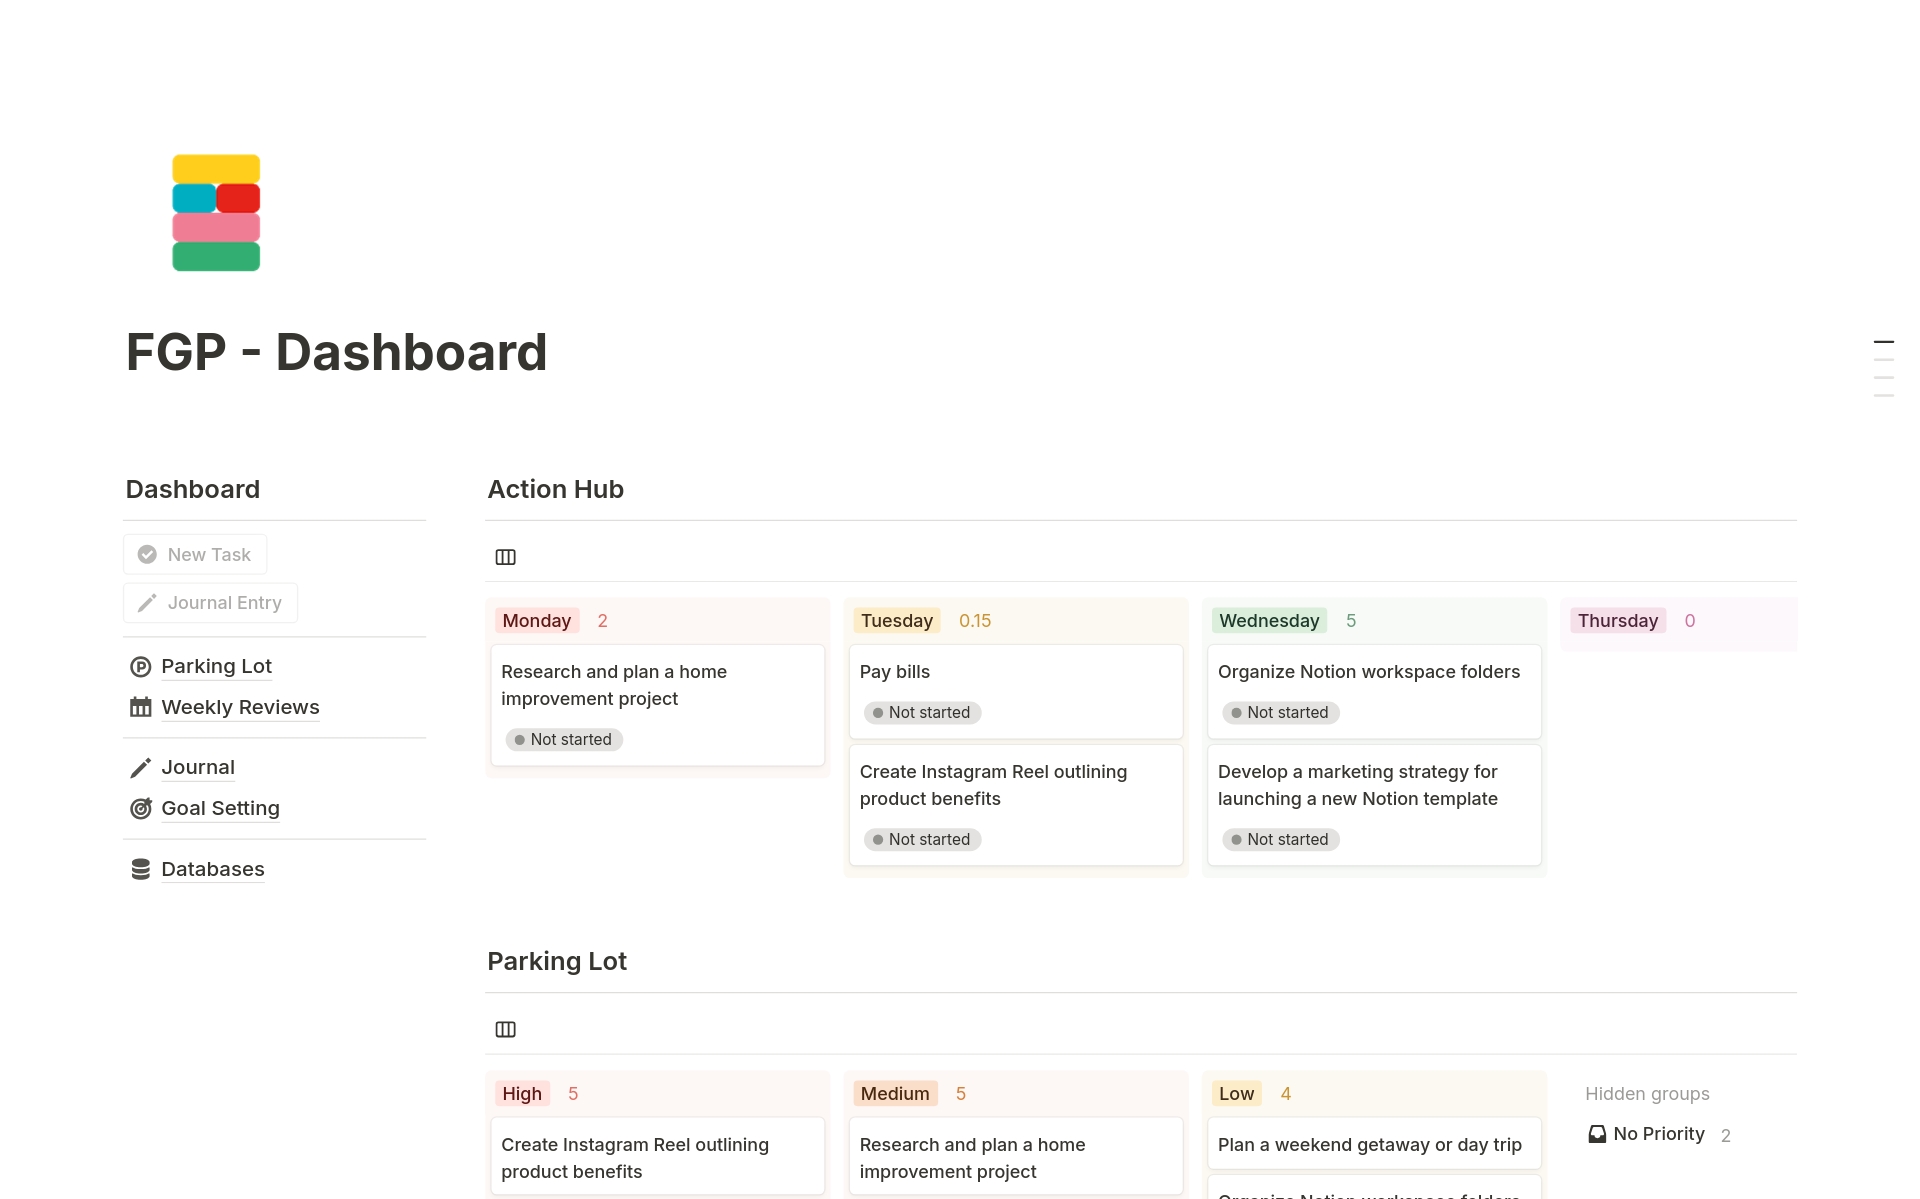 Have you ever wanted to supercharge your productivity in a way that feels good? Inspired by the wisdom of Ali Abdaal and his book, I've created the Feel-Good Productivity: Dashboard - Notion template just for you.